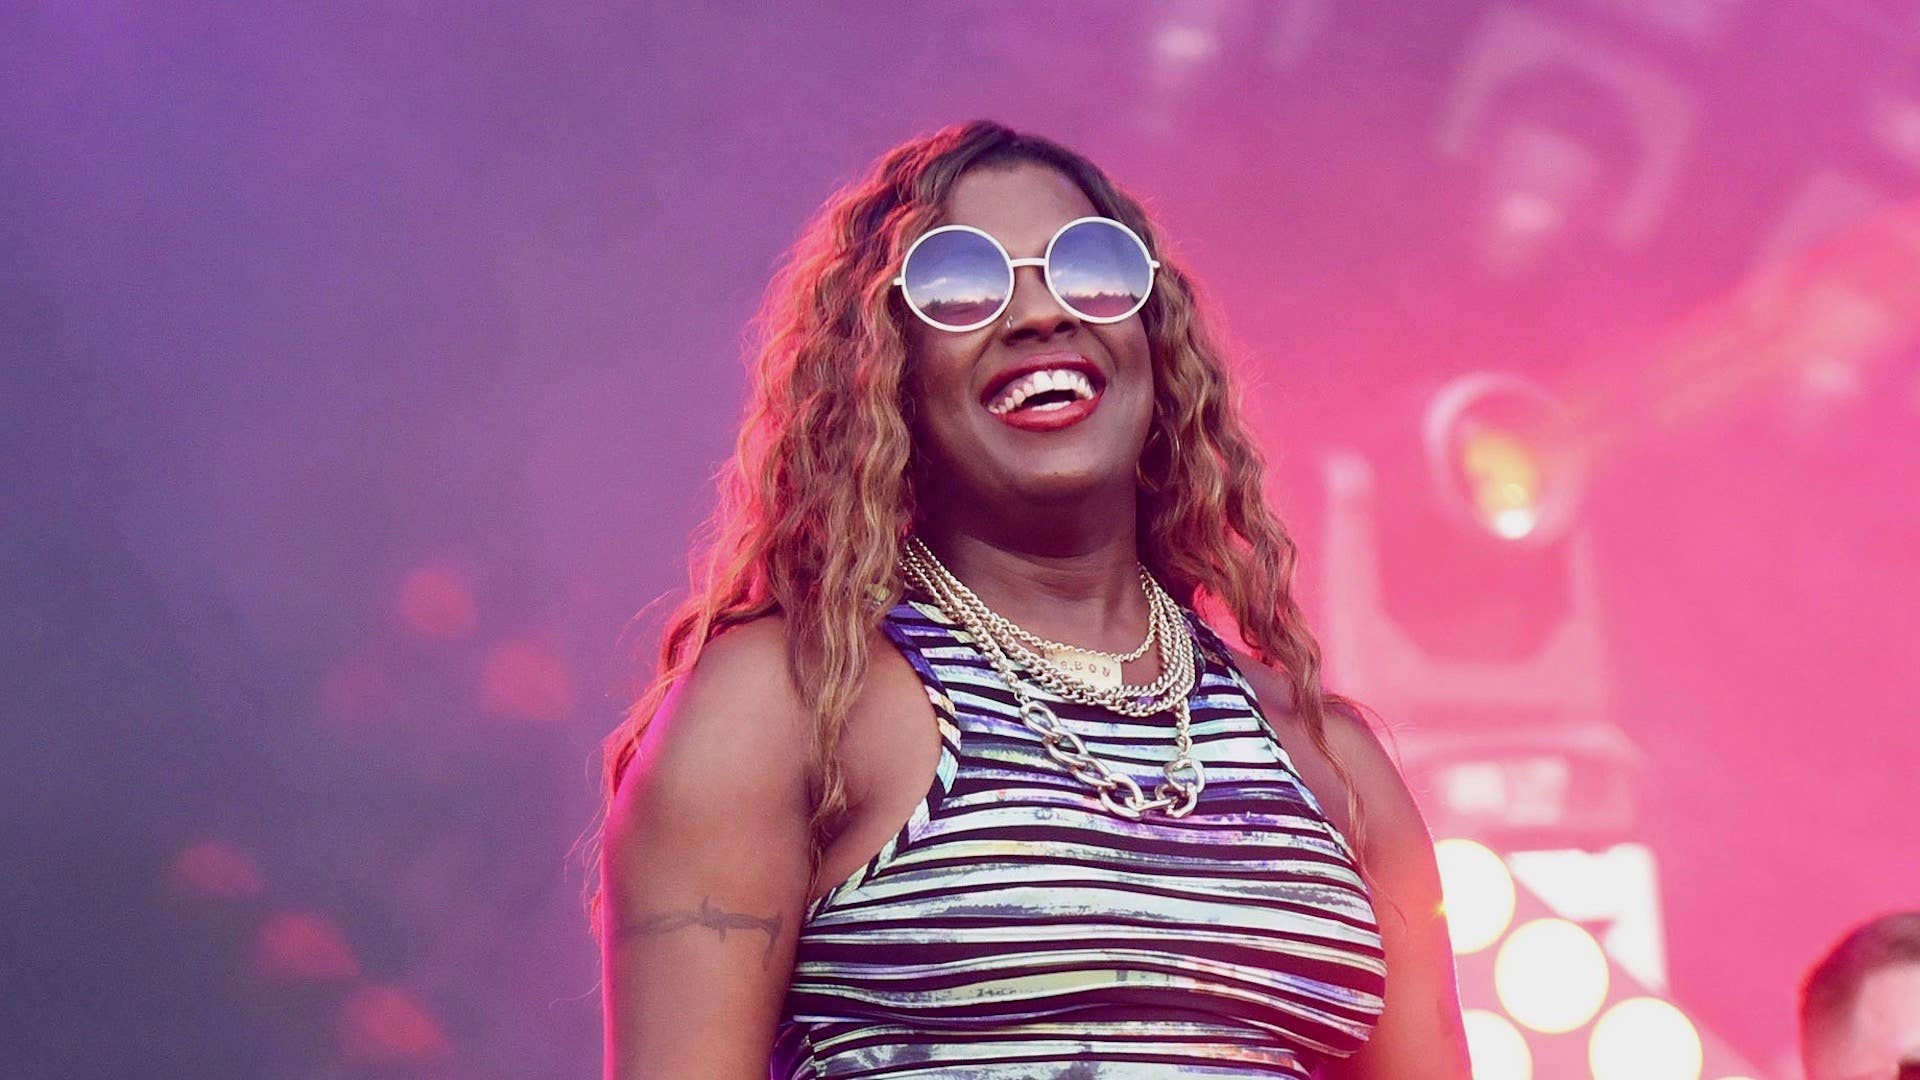 Gangsta Boo and El-P perform with Run The Jewels at Music Midtown at Piedmont Park